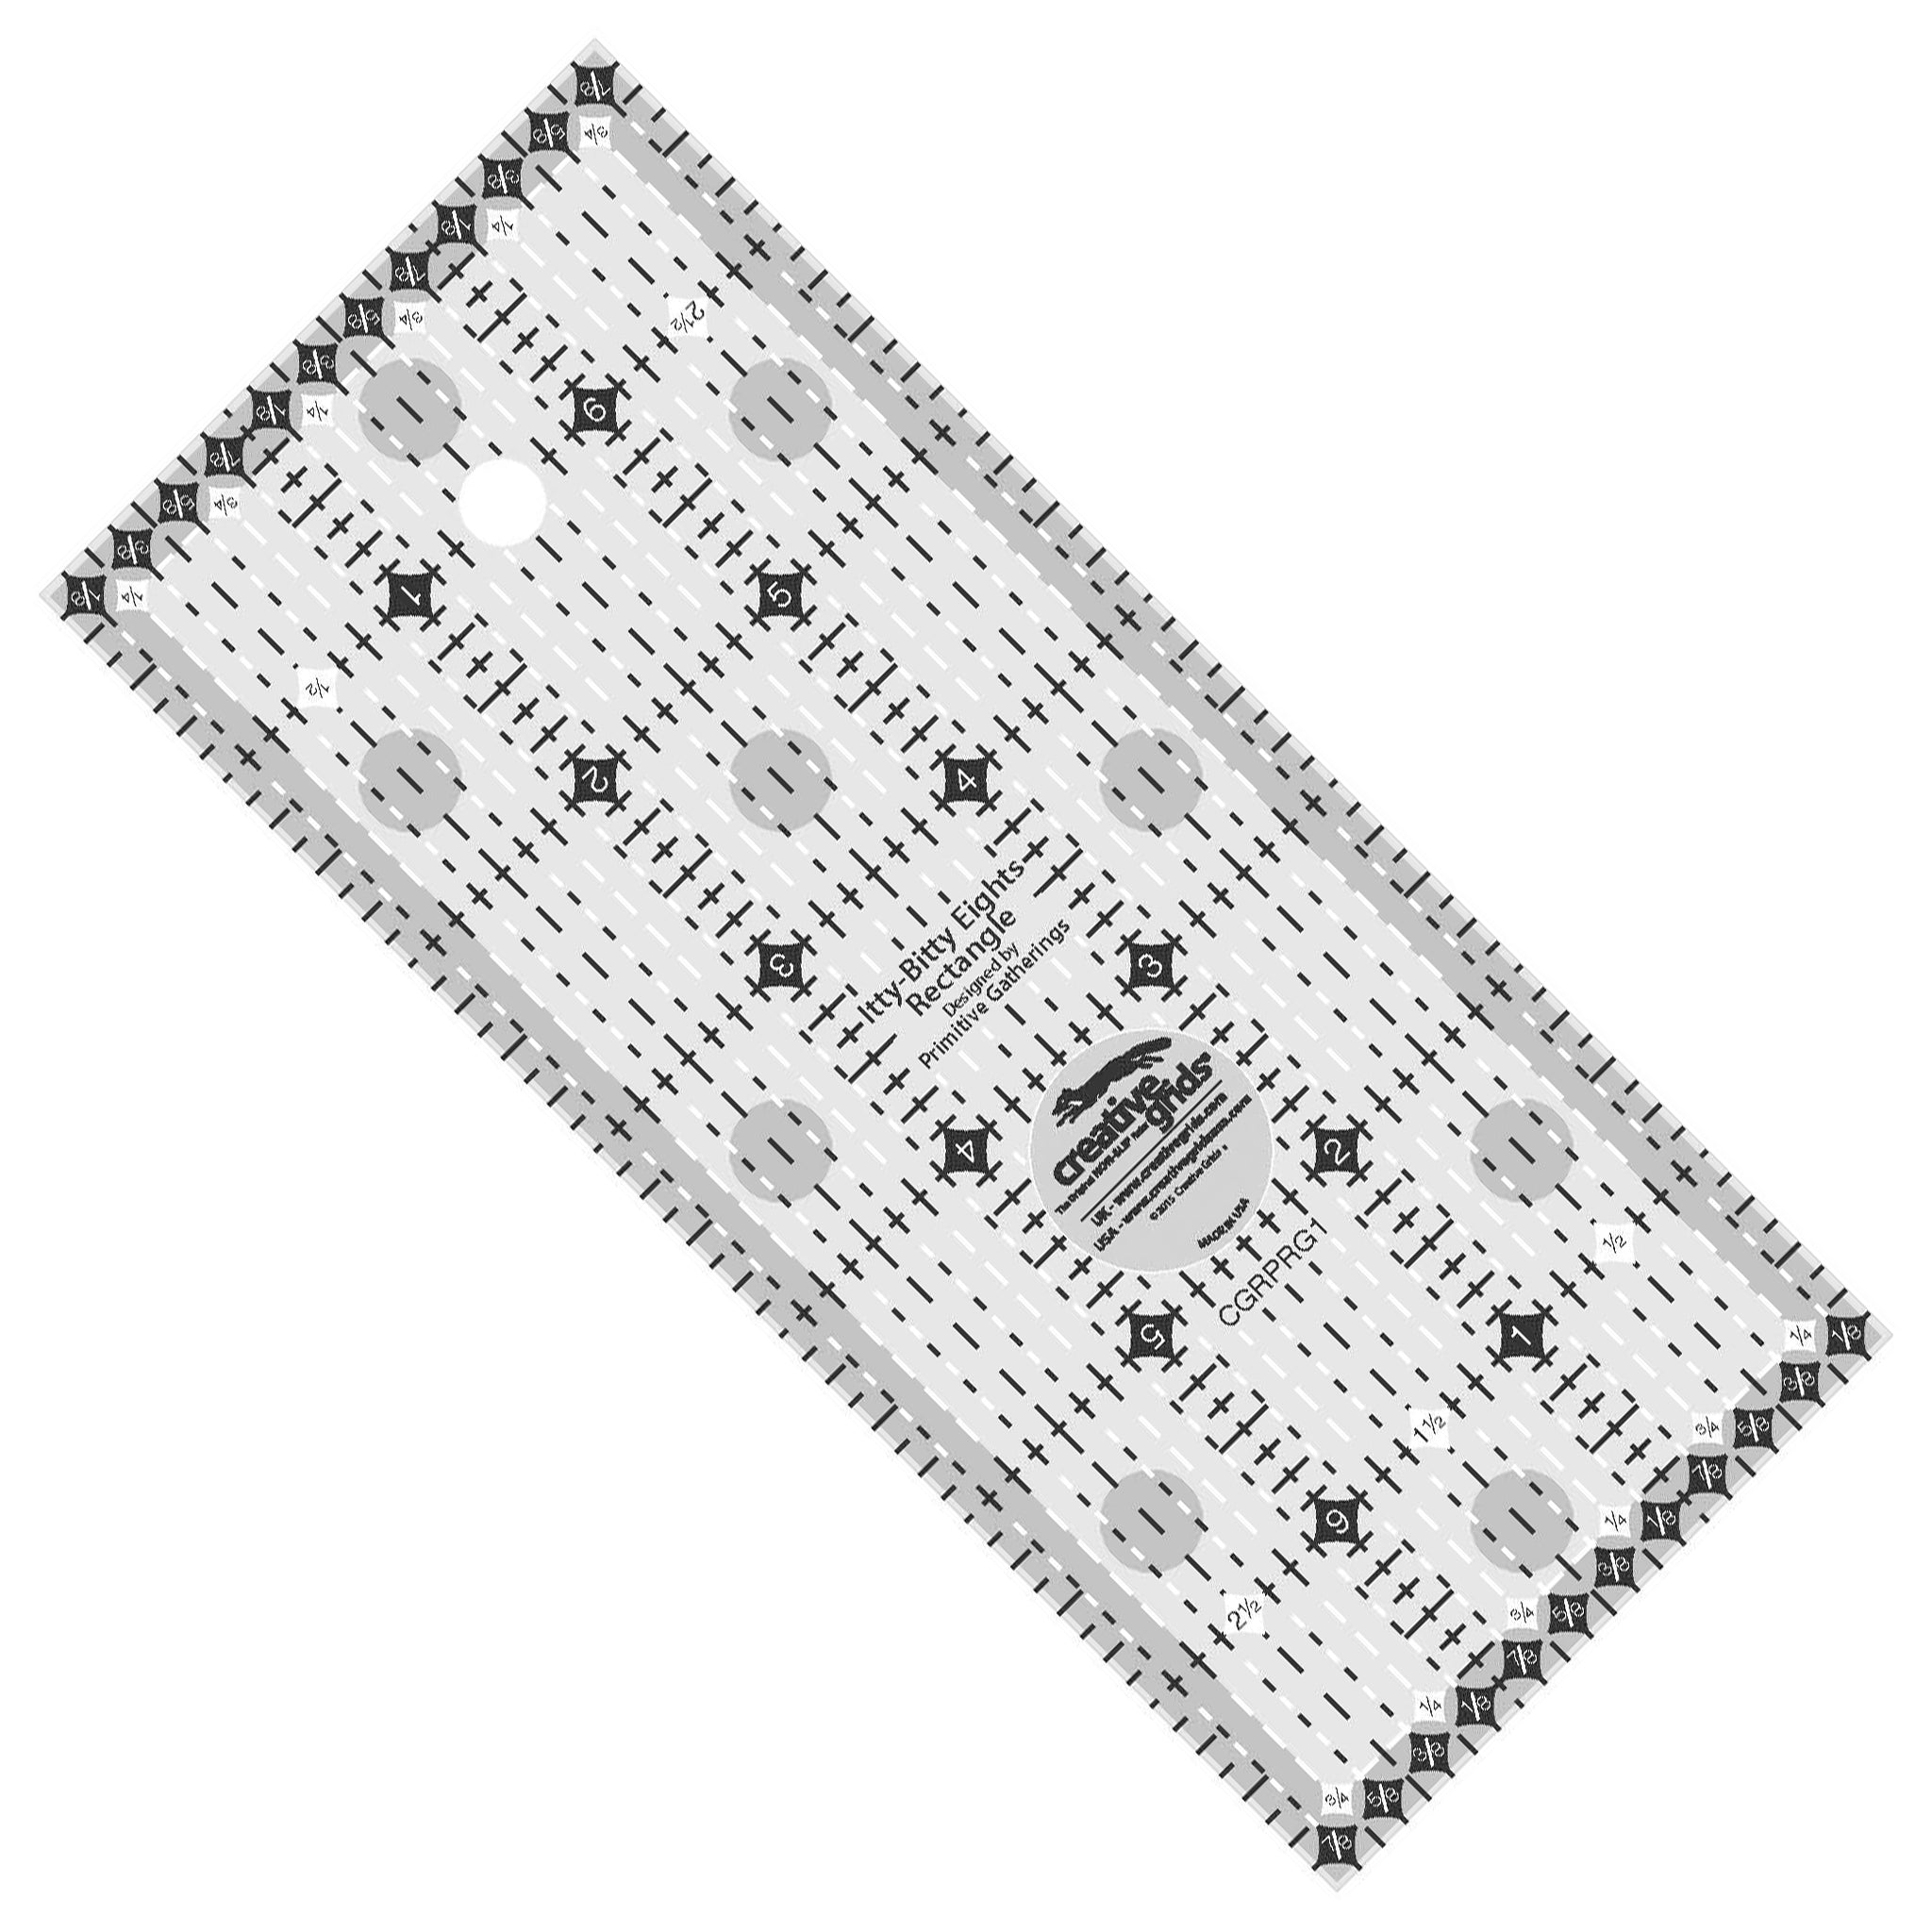 Creative Grids Itty-Bitty Eights Rectangle 3-Inch x 7-Inch Quilt Ruler (CGRPRG1)